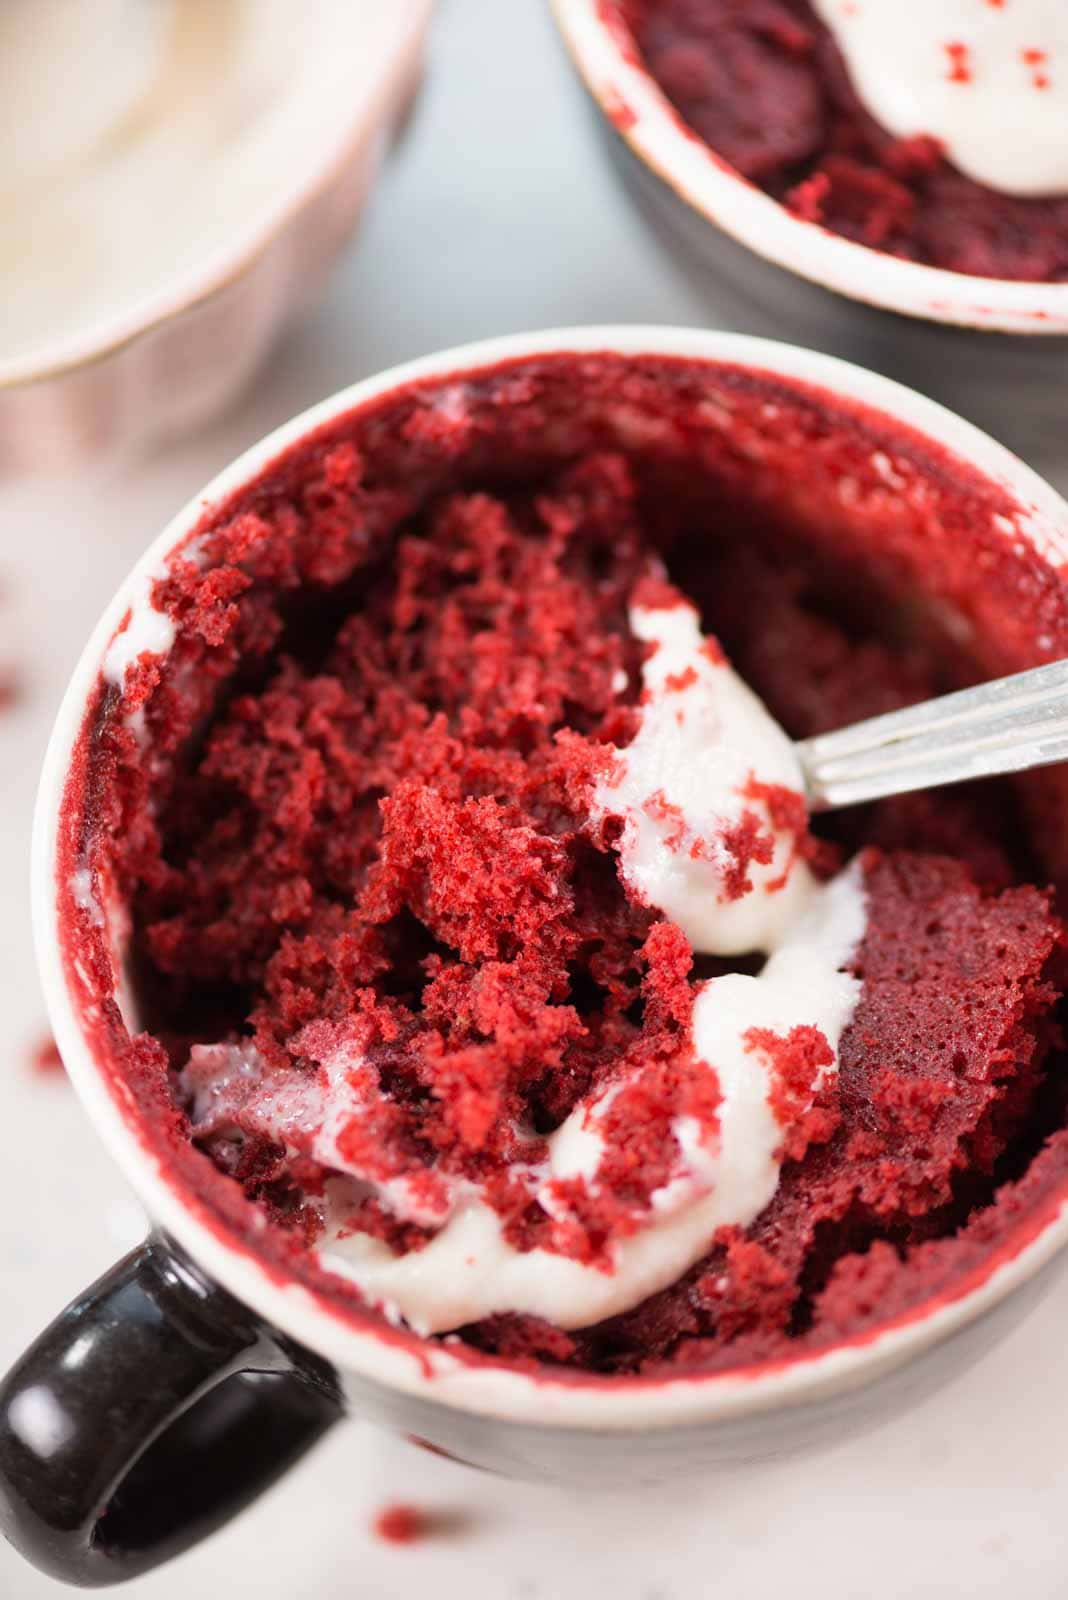 This Red Velvet Mug Cake is airy, ultra moist, and tastes just like the regular oven-baked red velvet cake. Topped with cream cheese frosting, this eggless microwave mug cake is ready in less than 10 minutes.